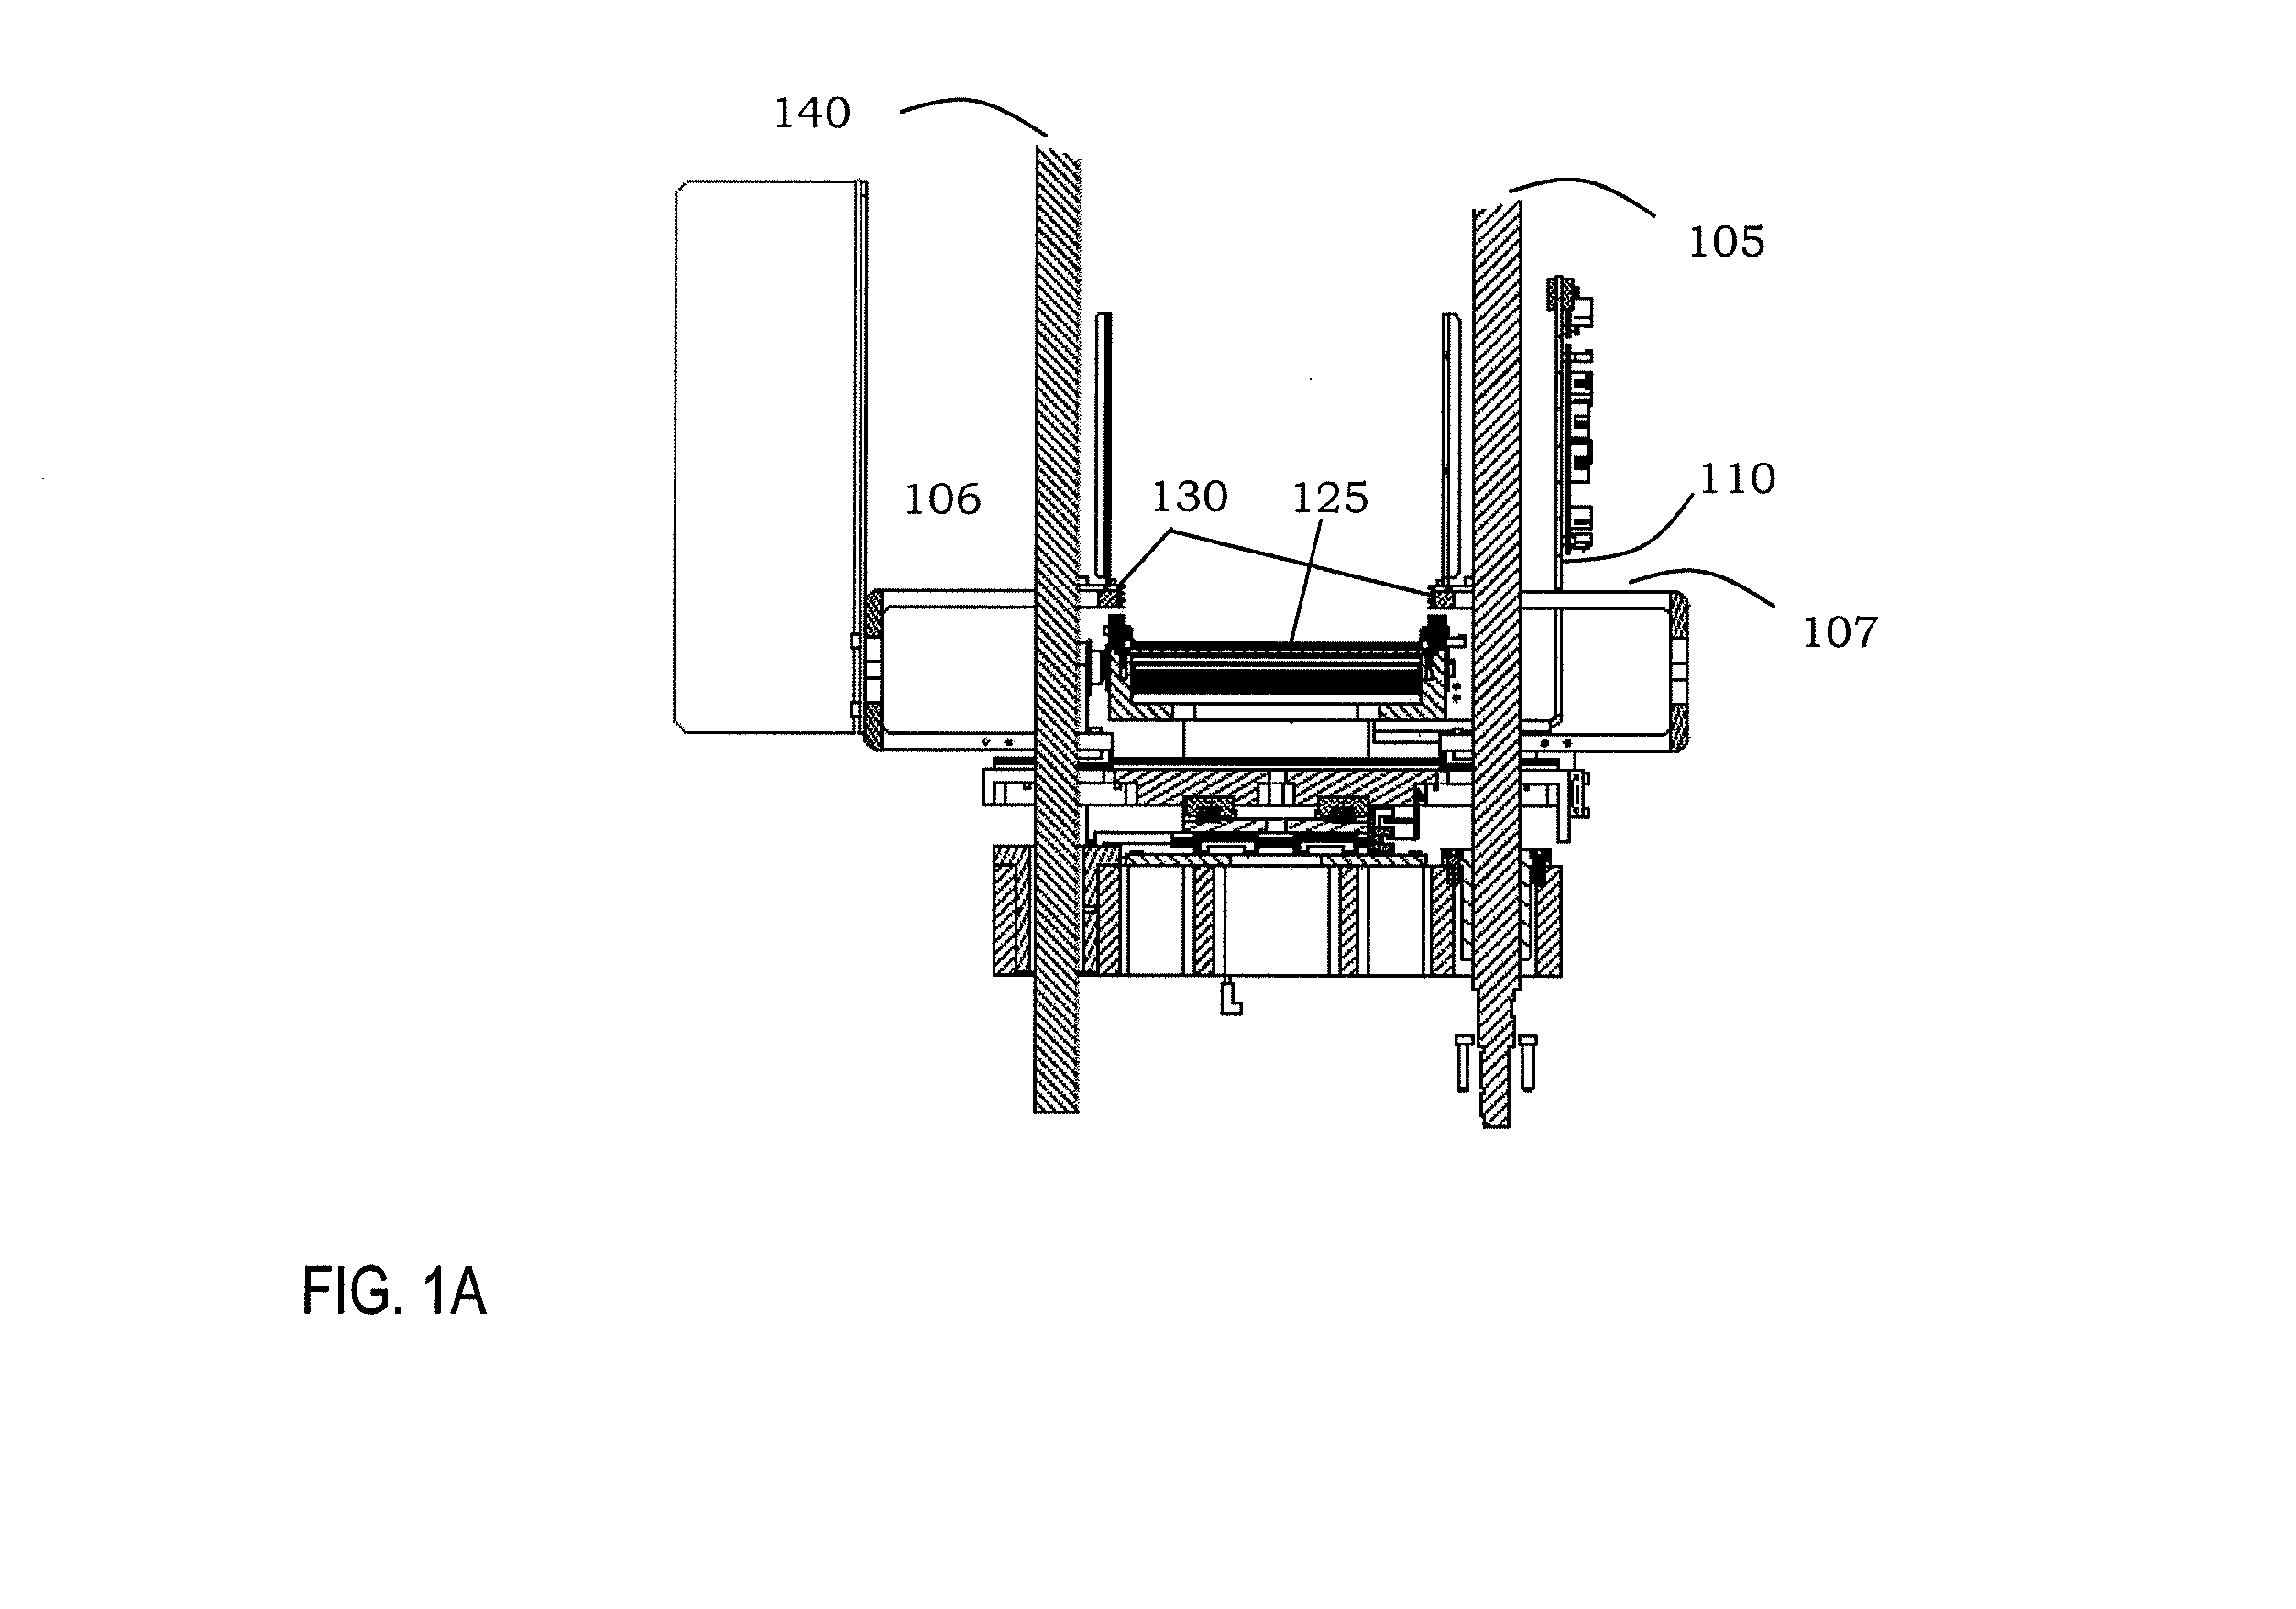 Package delivery kiosk including integrated robotic package lifting assembly with shelving system